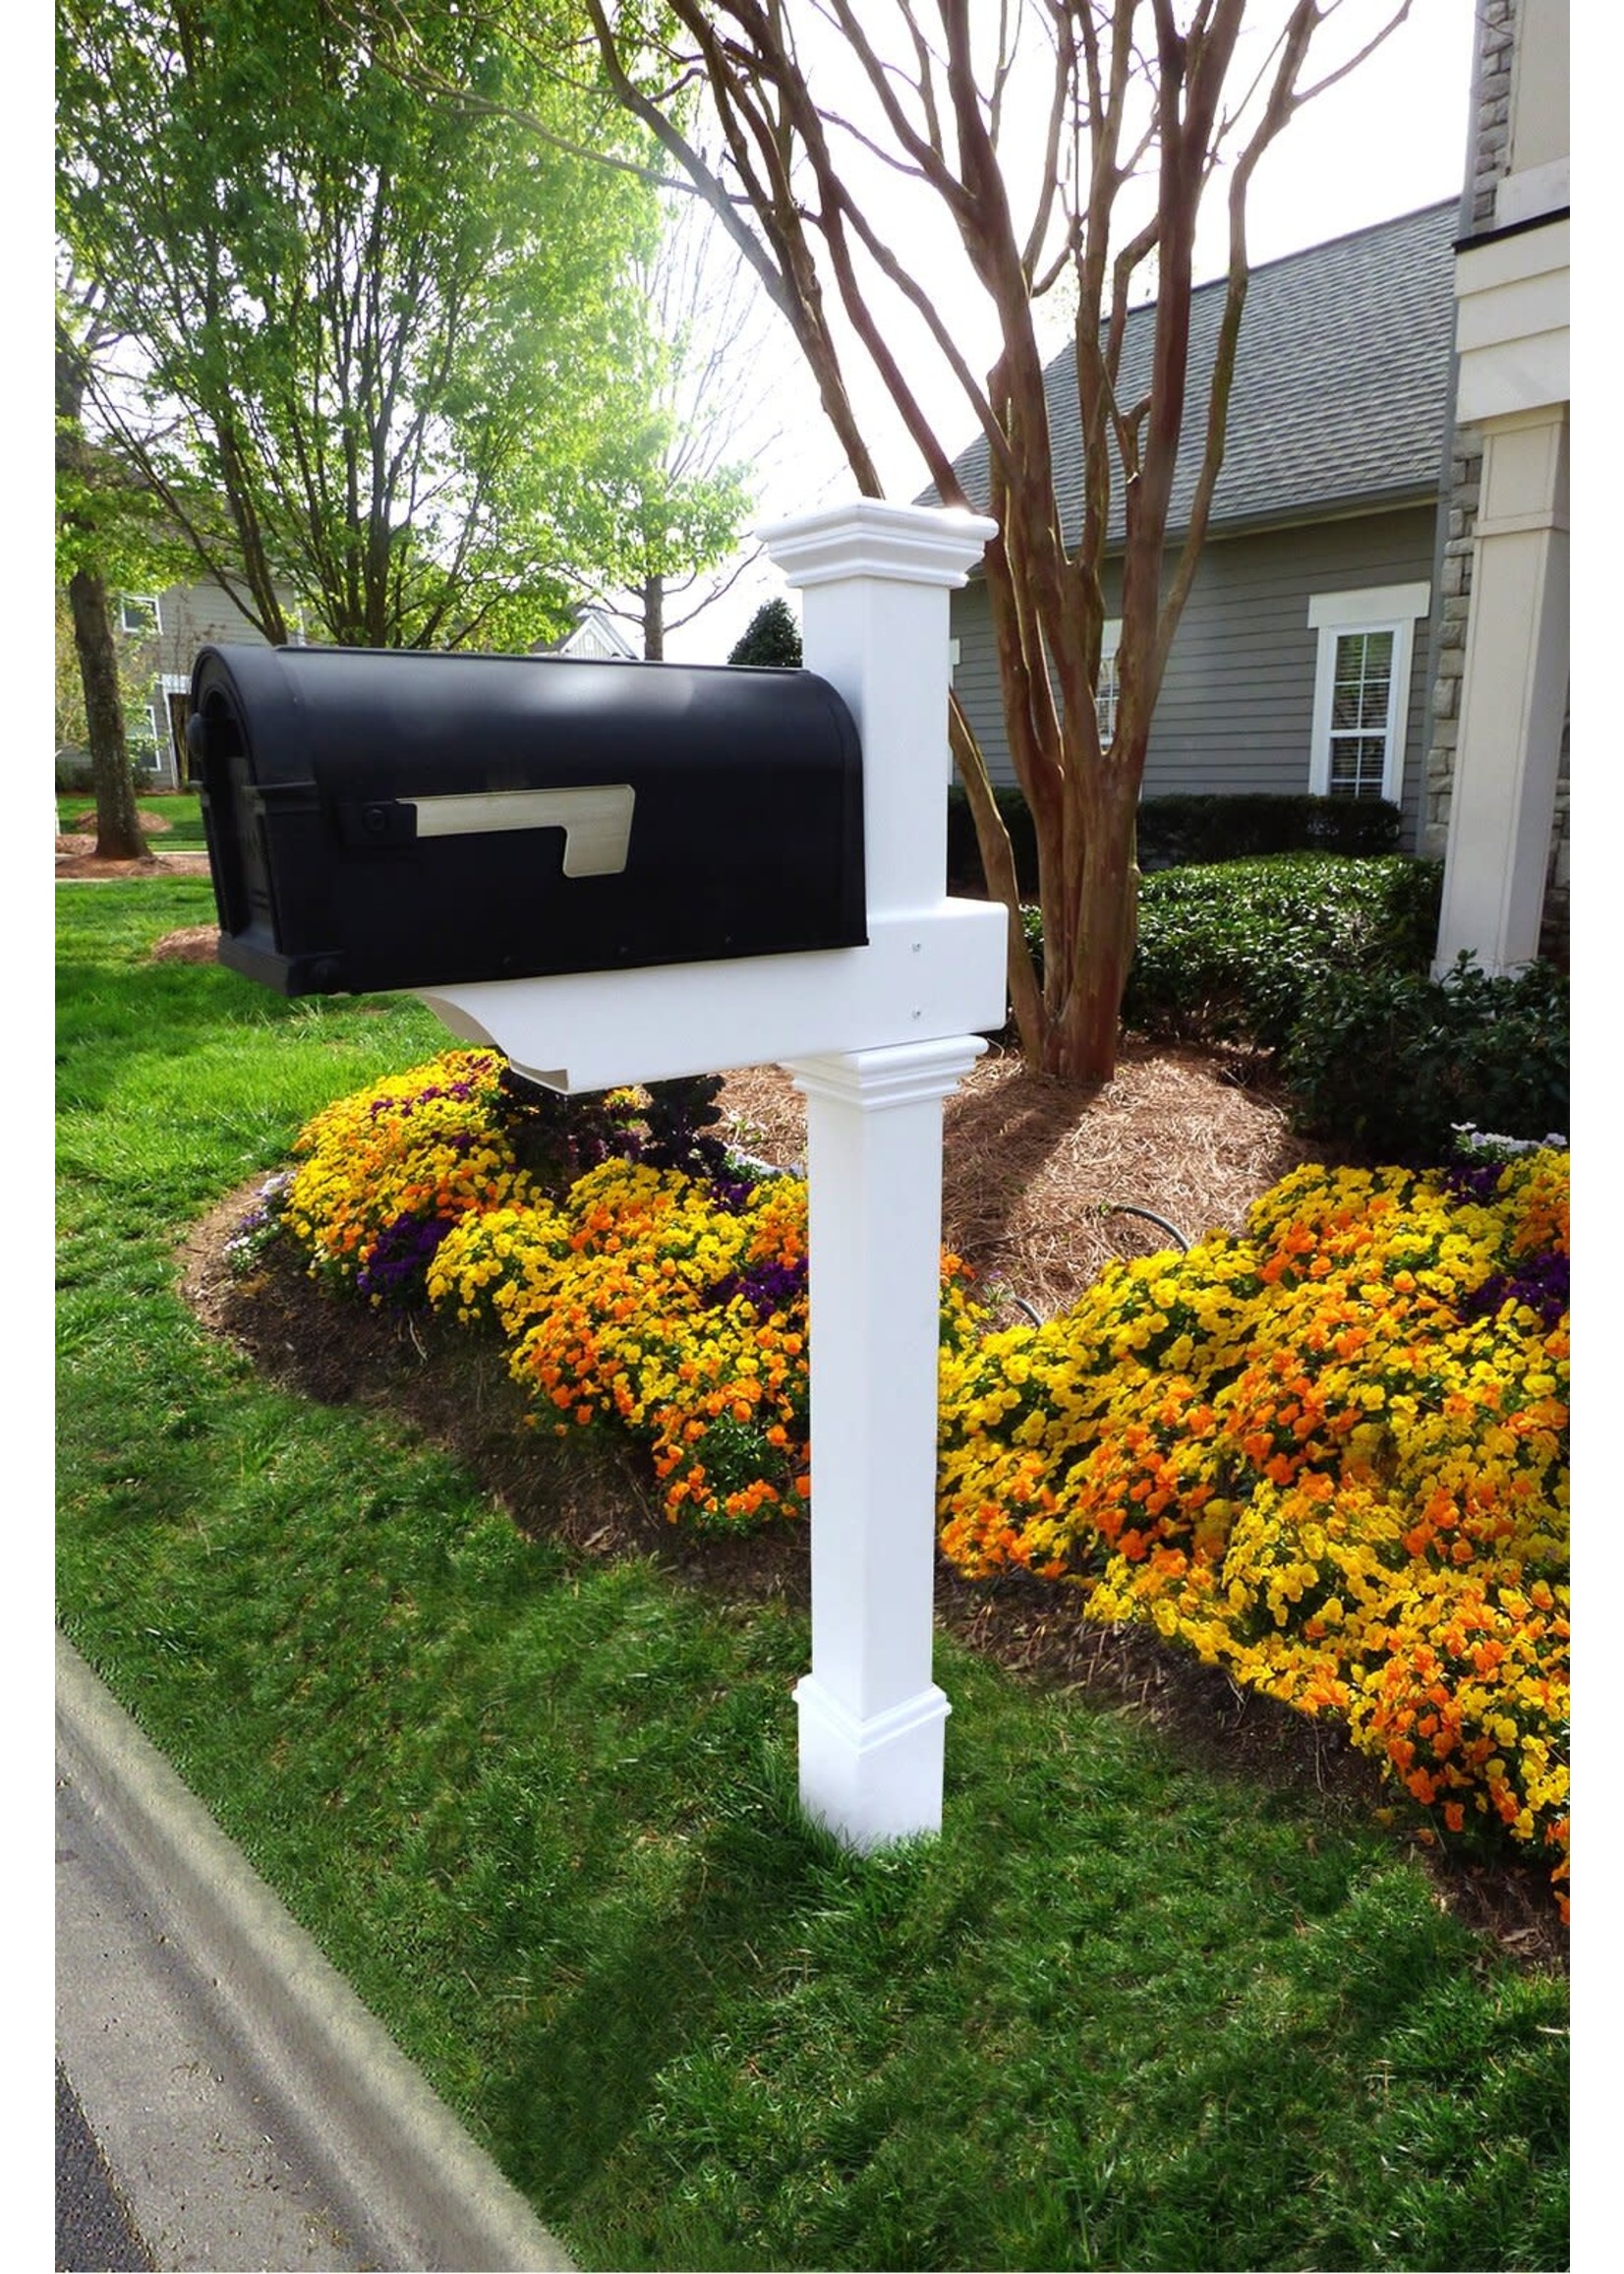 *MAILBOX NOT INCLUDED - 27" W x 57" H In-Ground Decorative Post with Newspaper Holder